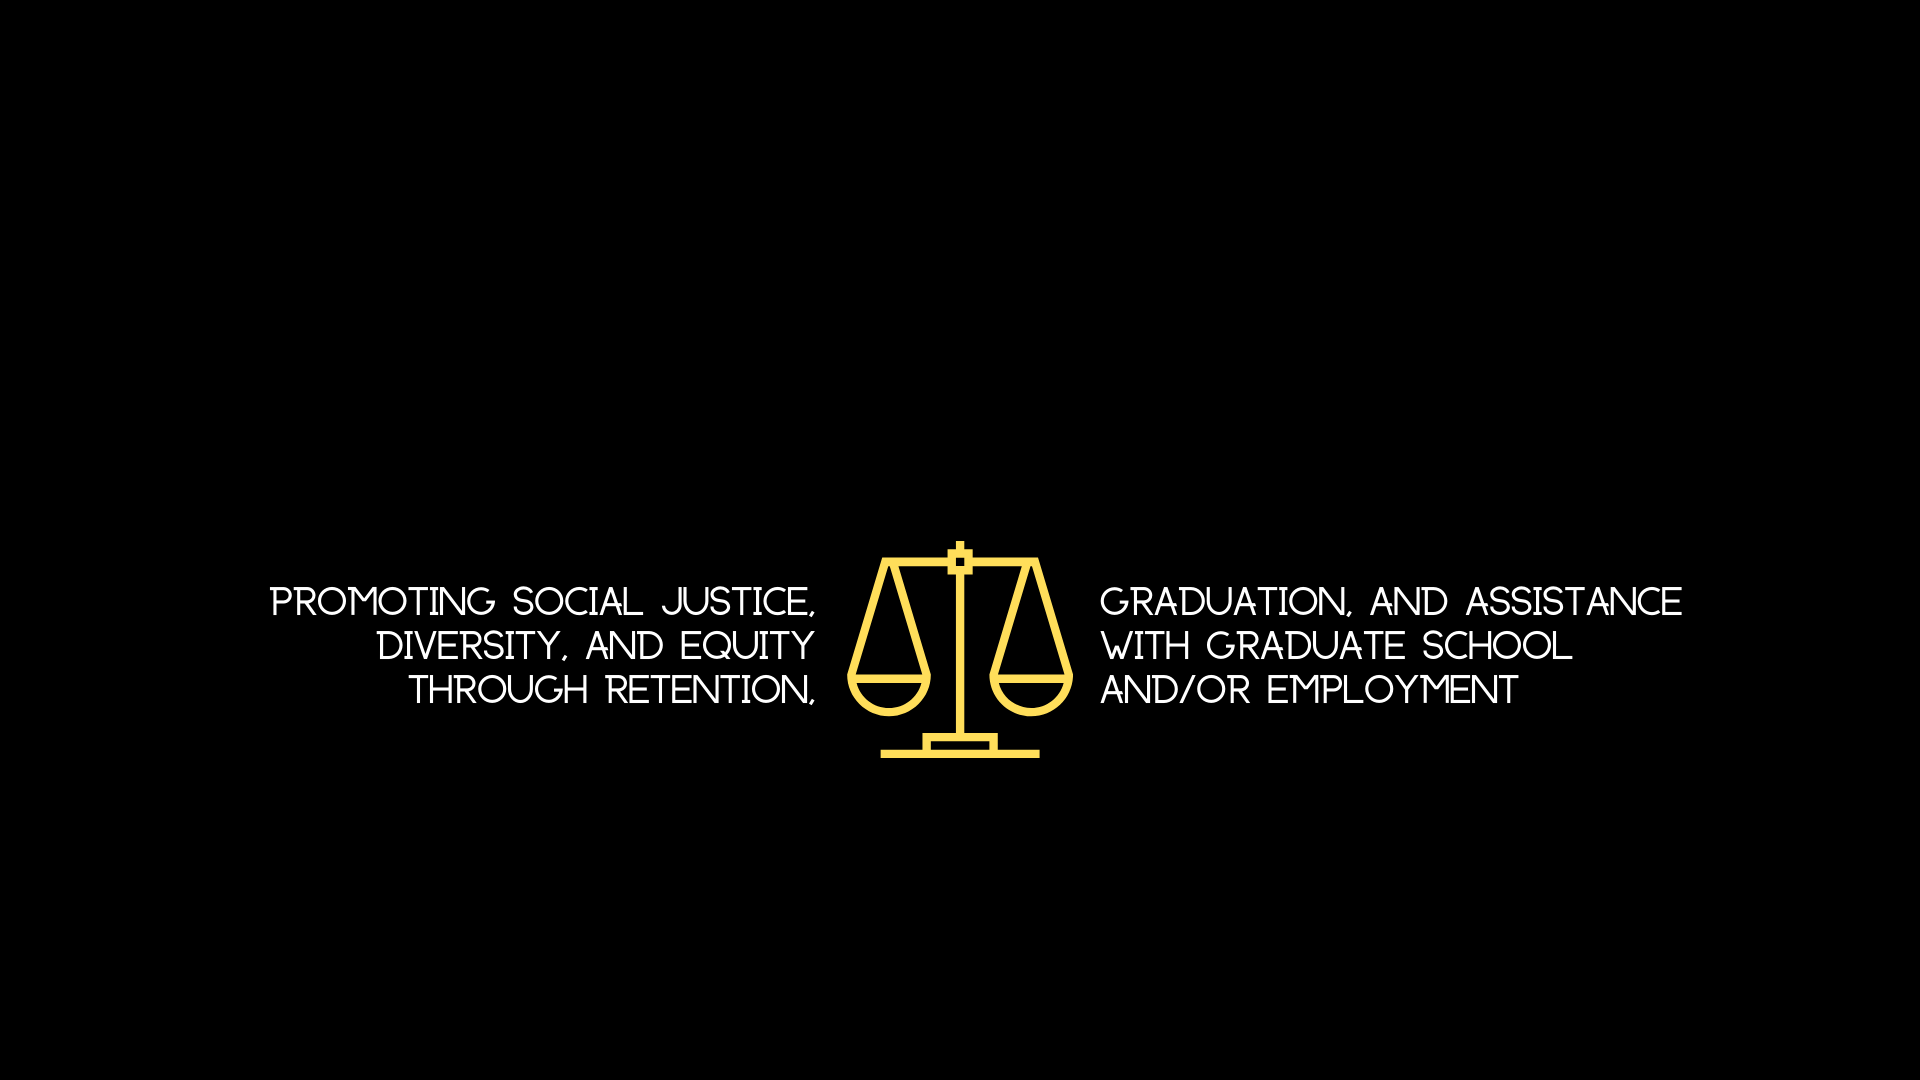 Promoting Social Justice, Diversity and Equity through Retention, Graduation and Assistance with Graduate School and / or employment